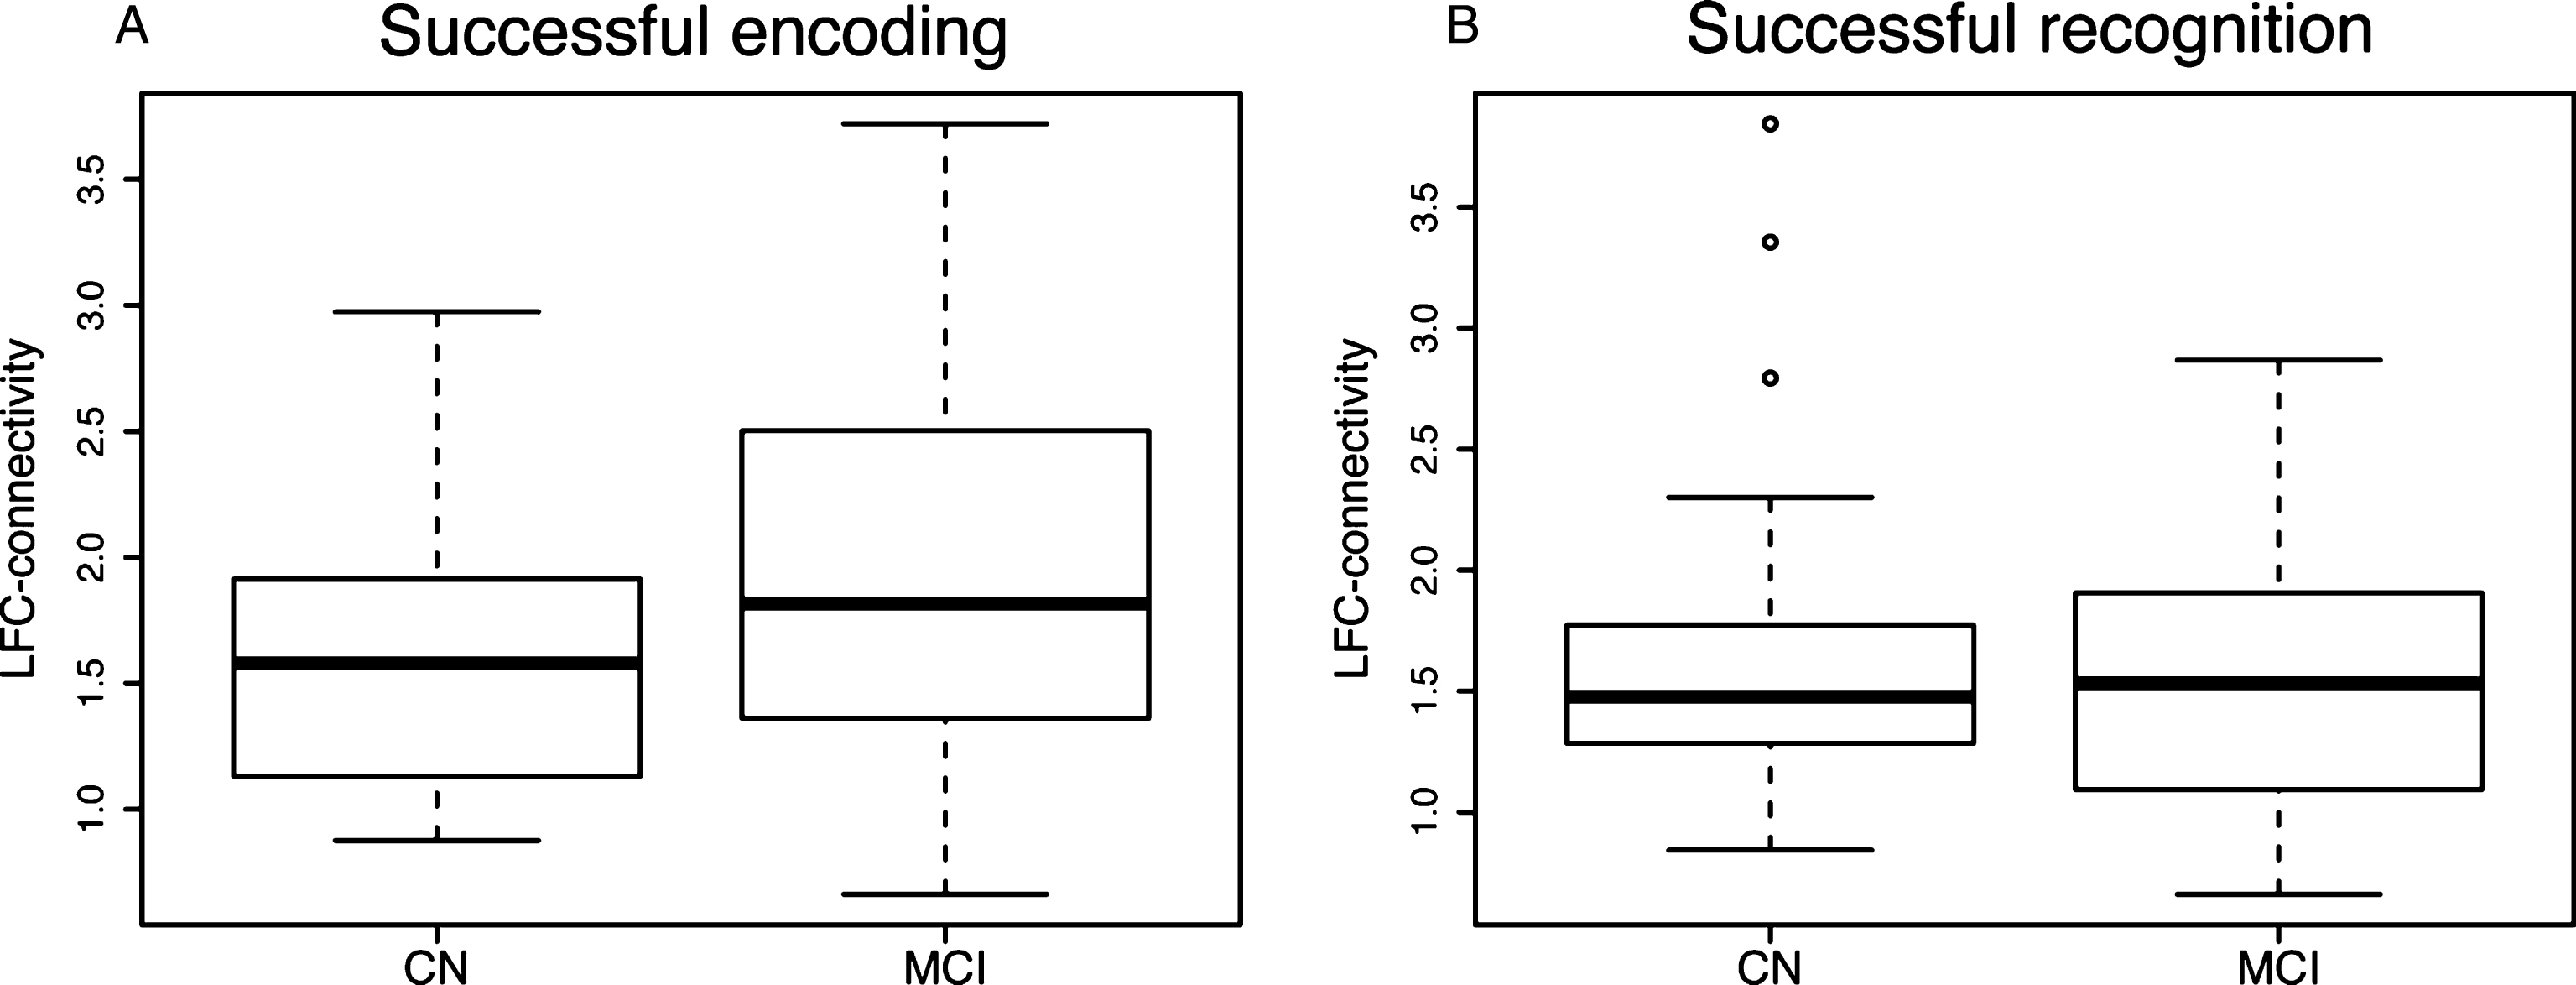 Boxplots illustrating mean task-related LFC-connectivity across diagnostic groups for successful encoding (A) and successful recognition (B).